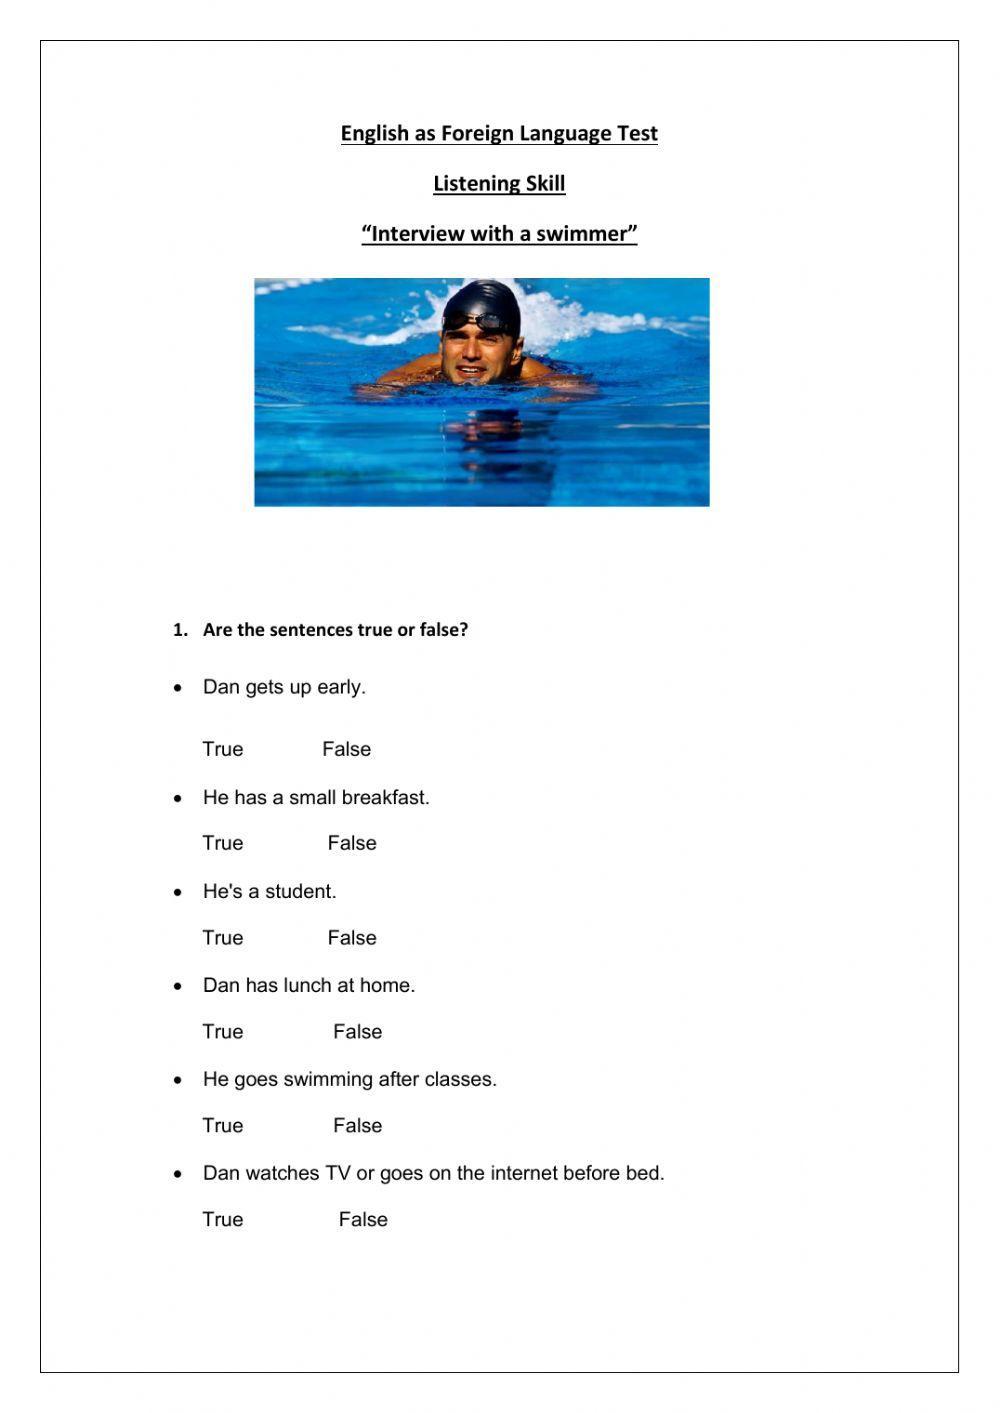 Interview with a swimmer - Listening Skill